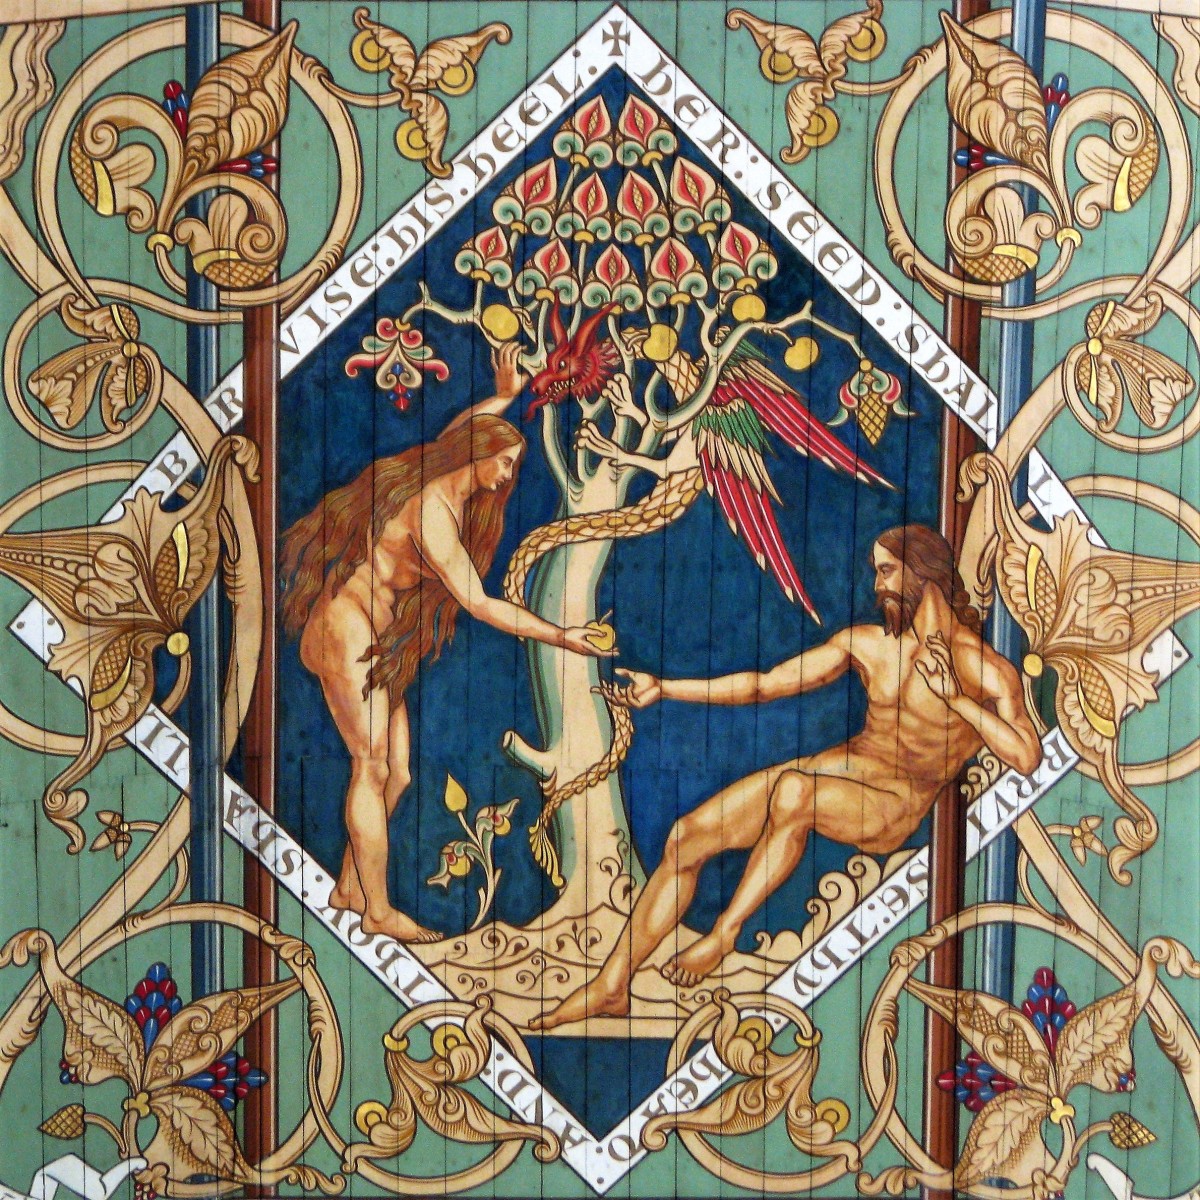 An ornamental image of Adam and Eve with the forbidden fruit, watched by the snake on the tree of knowledge